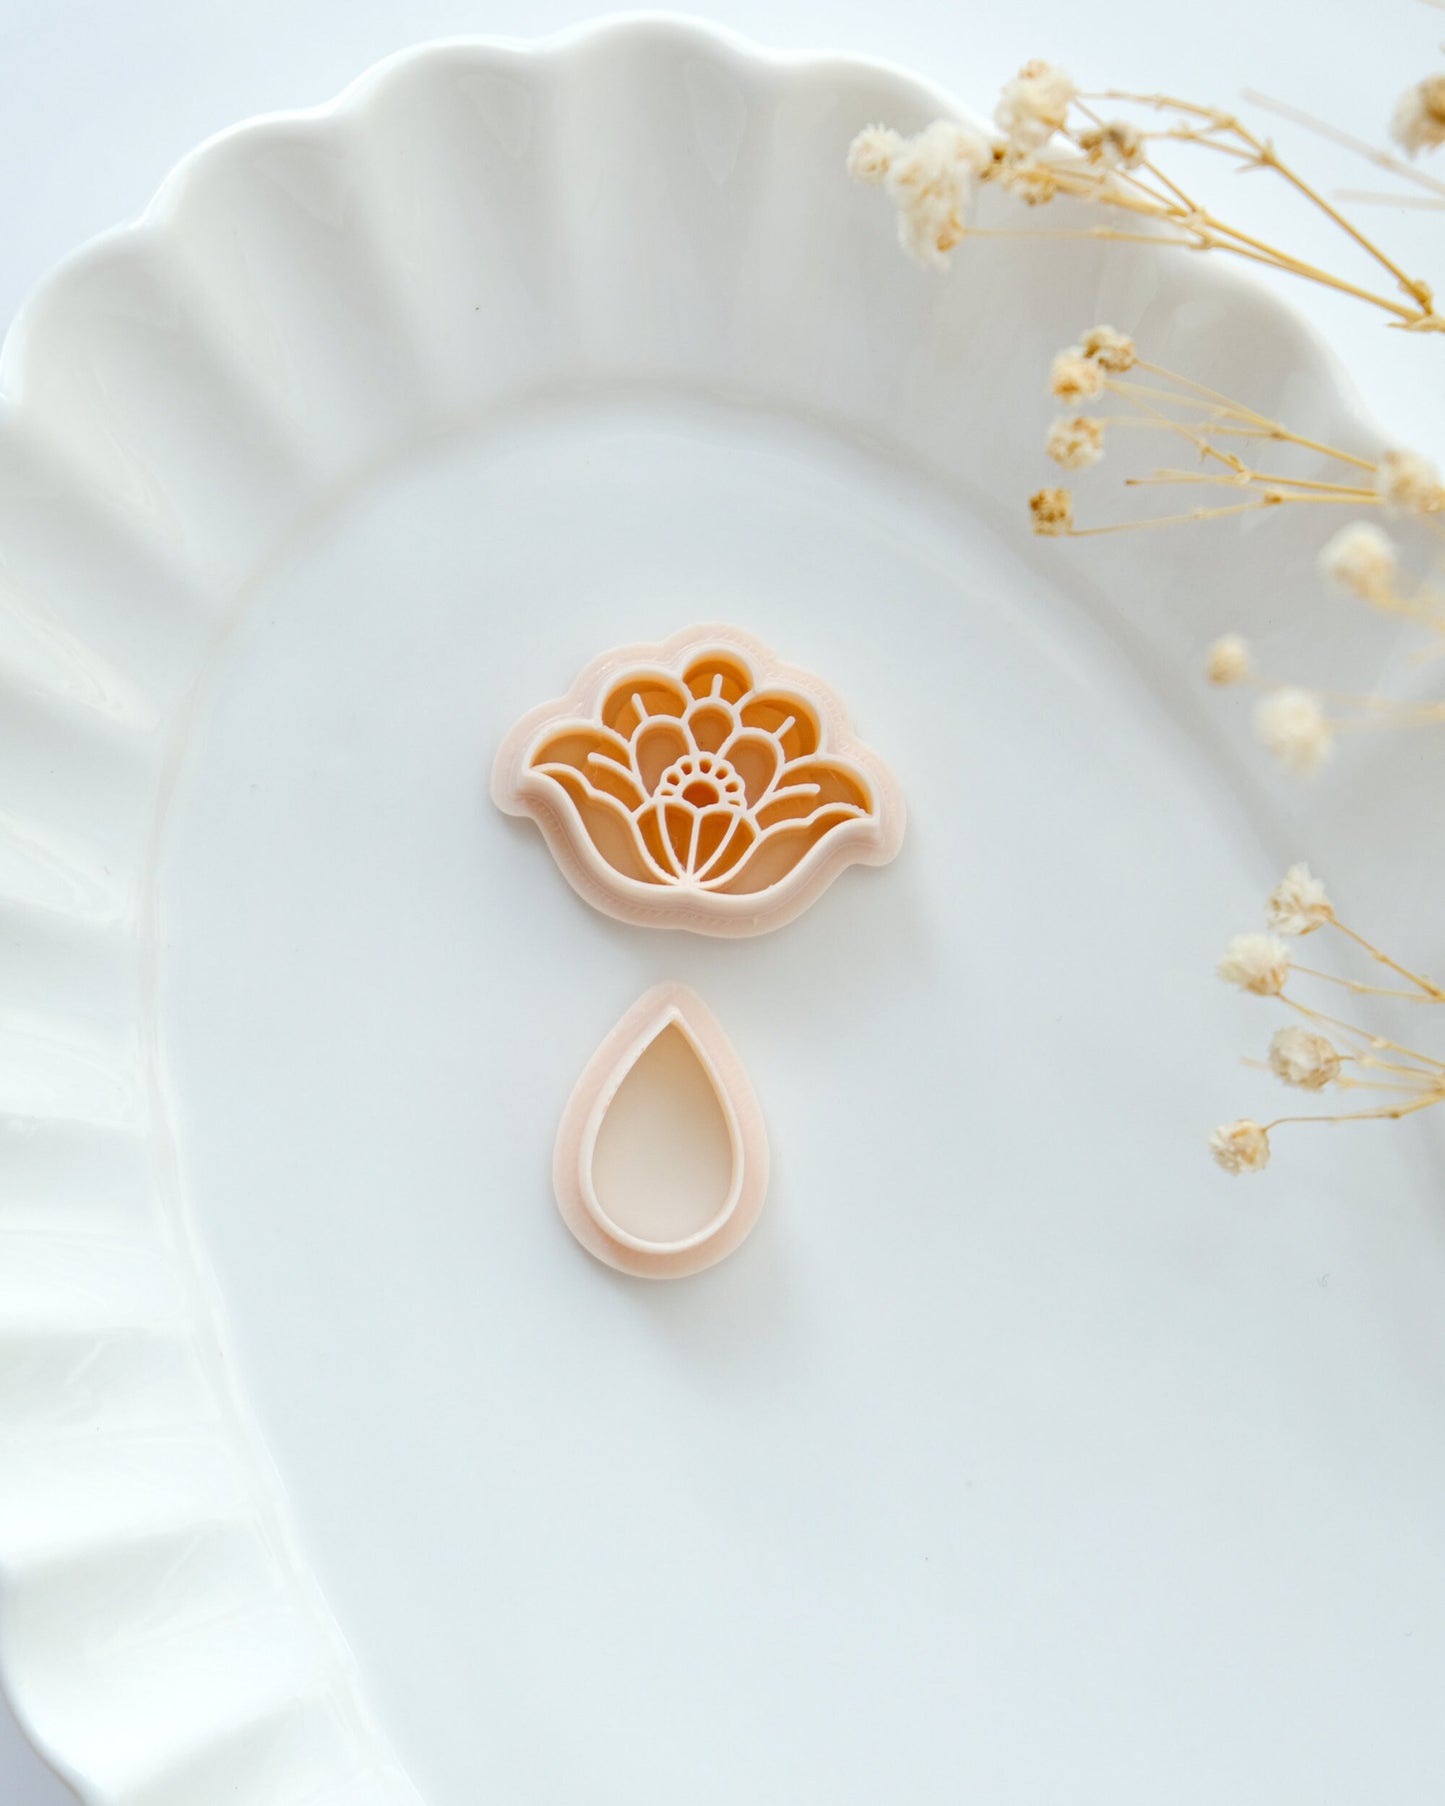 Art Deco Floral Polymer Clay Cutters | Spring Clay Cutters | Clay Earring Cutters | Jewelry Making | 3D Printed Cutters